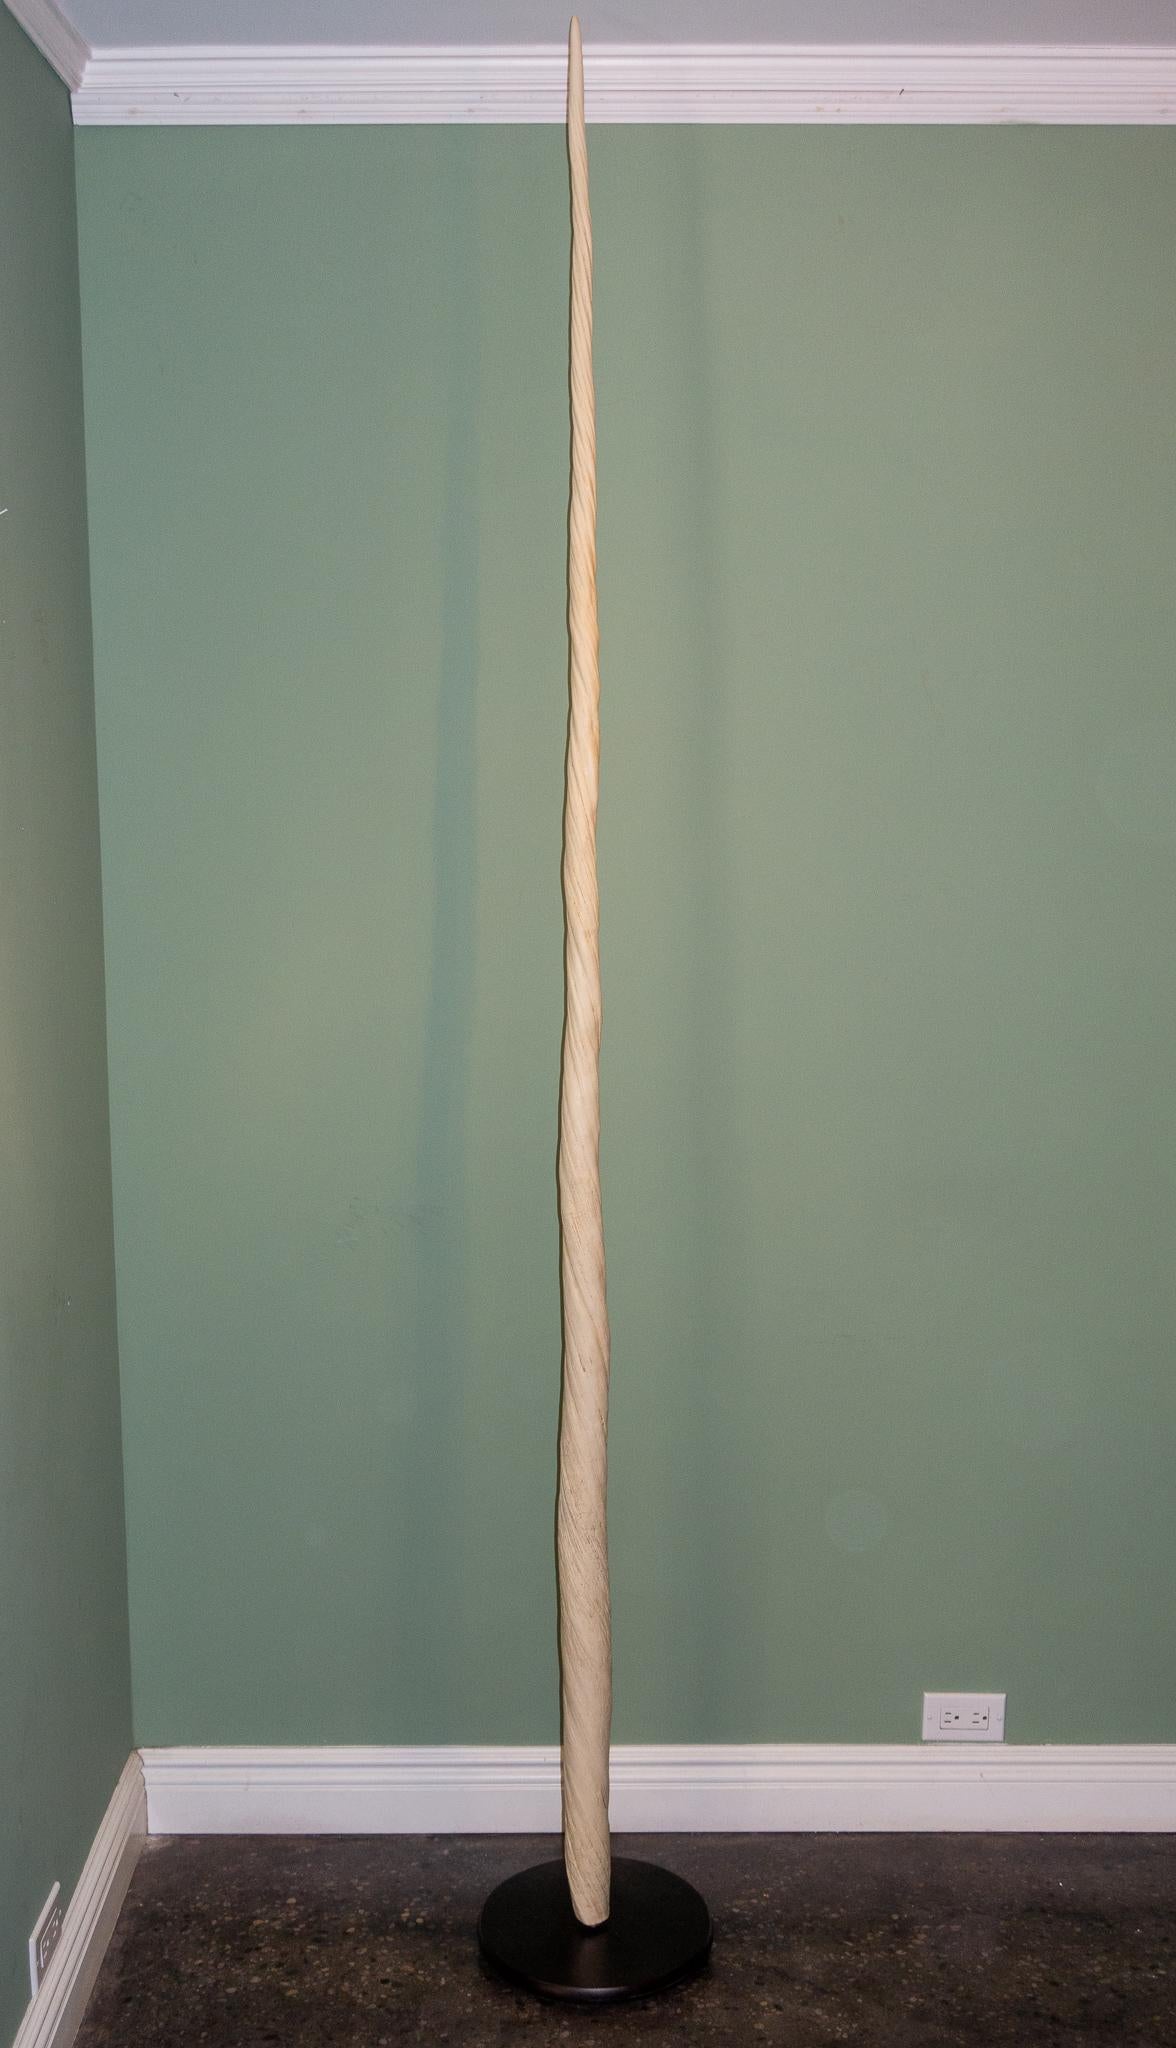 This Narwhal Tusk replica measures an impressive 90 inches in length, making it a striking and eye-catching decorative piece. The tusk itself is intricately detailed and crafted to resemble the real thing, with a distinctive spiral shape and smooth,